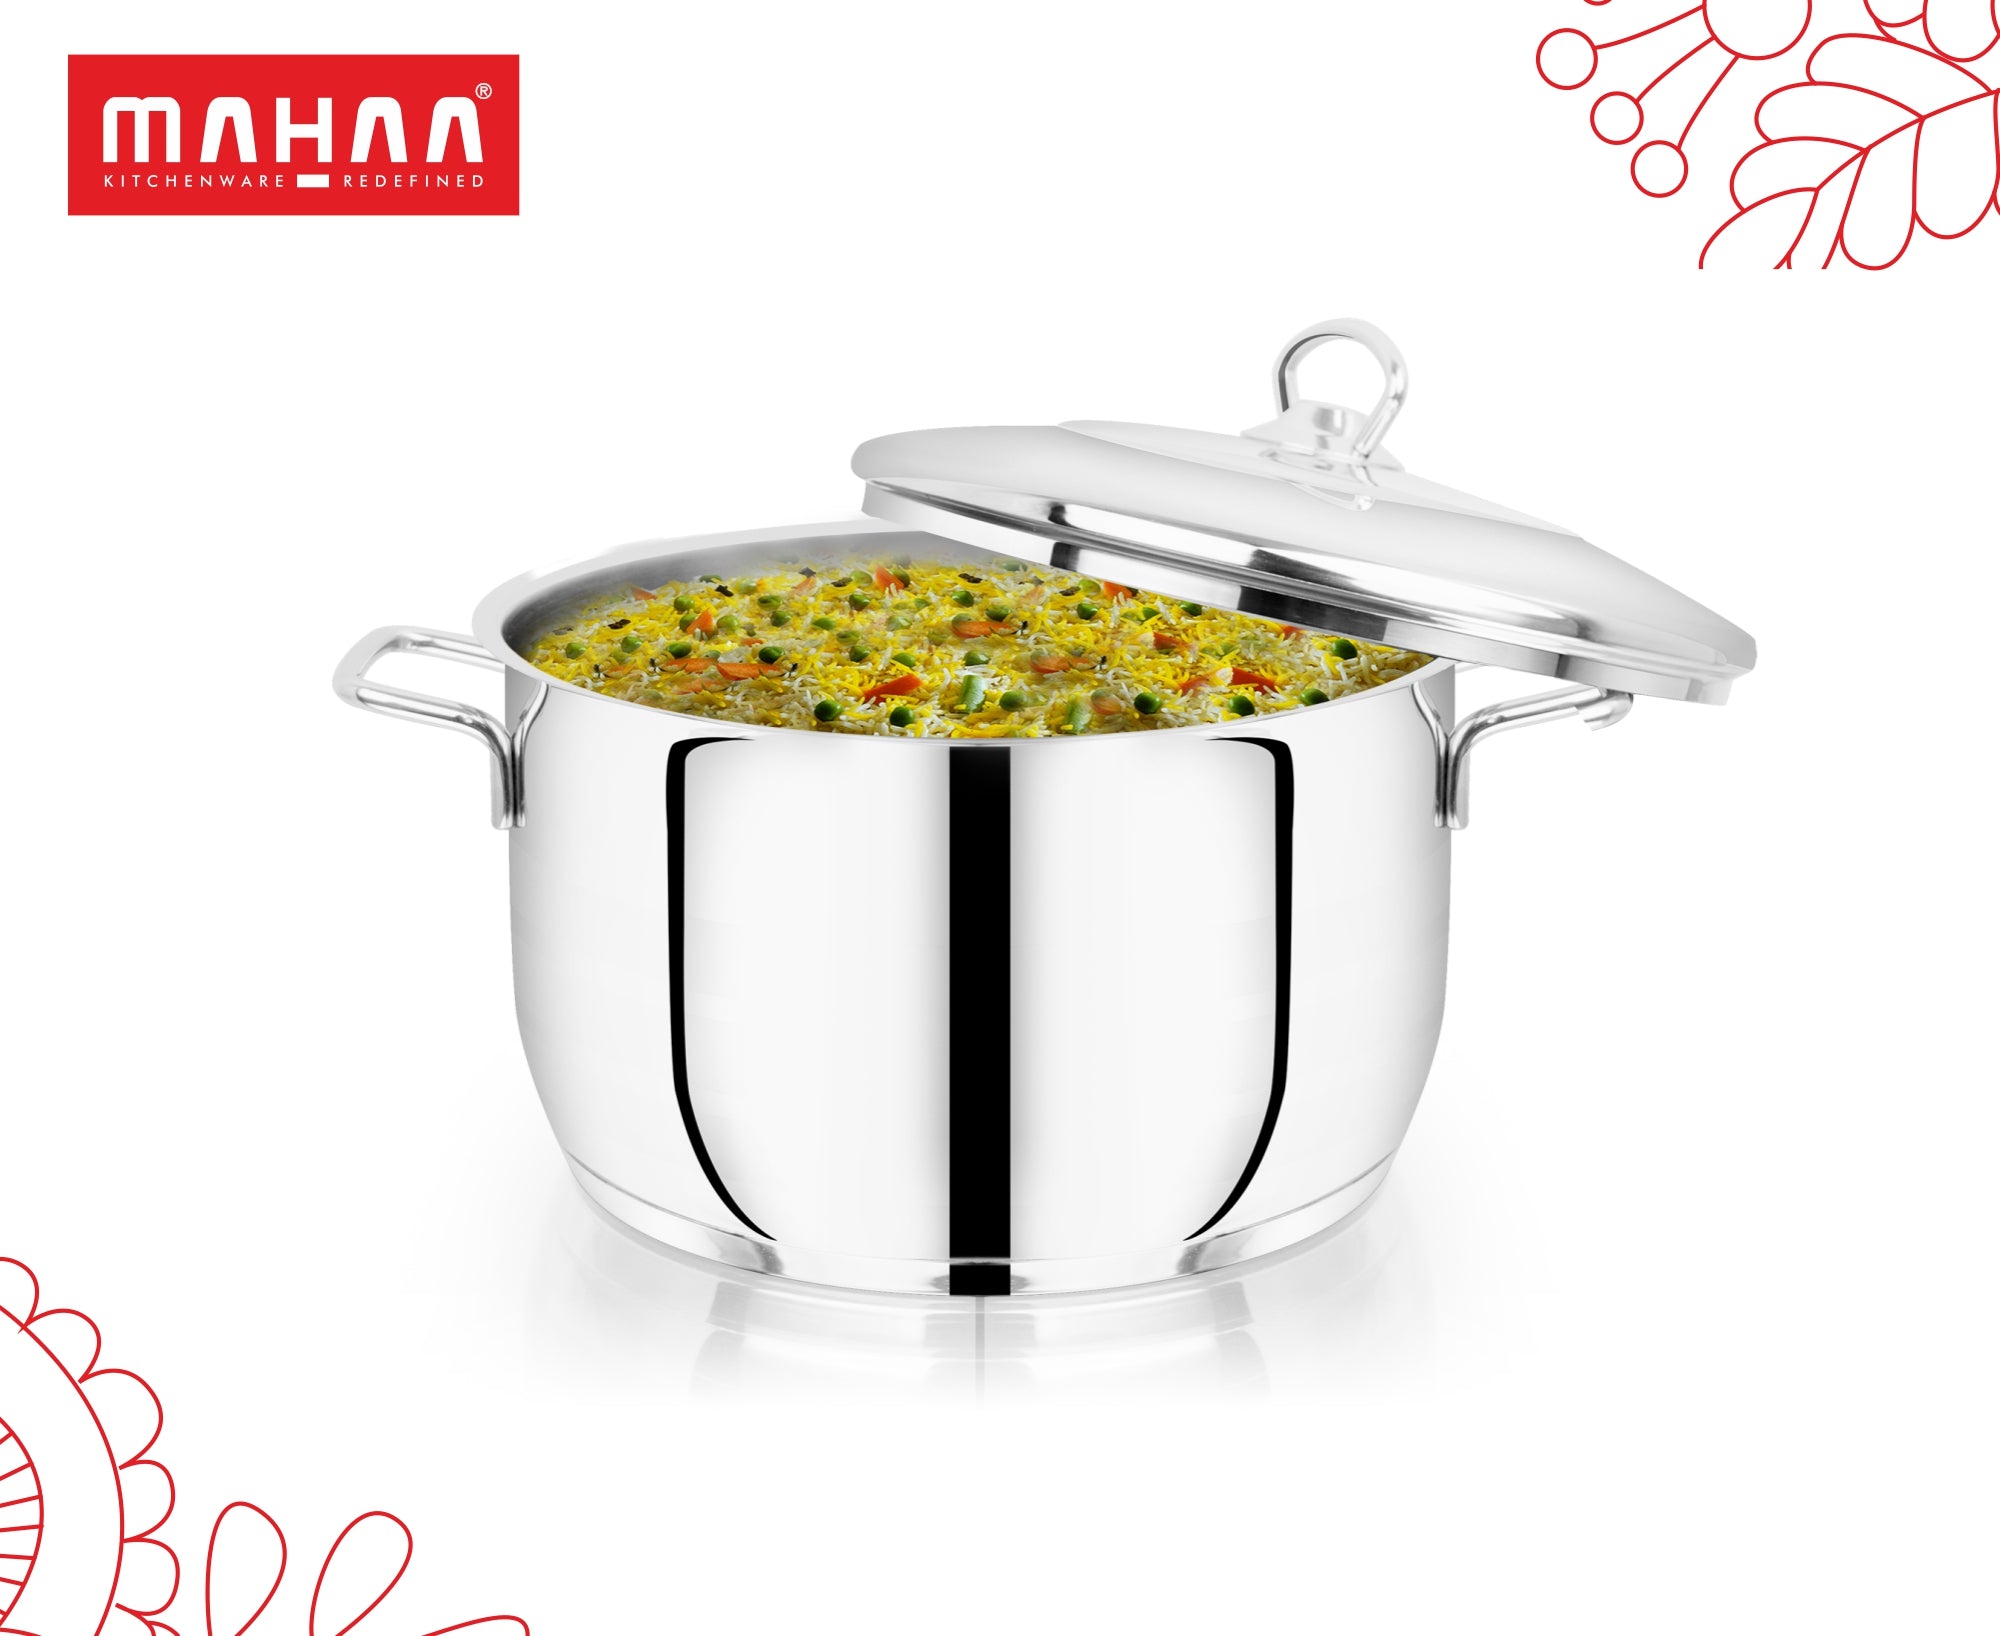 Avanti Cooking Pot / Biryani Pot - 304 Grade - Triply Bottom with Lid - Induction and Gas compatible (15% Off)